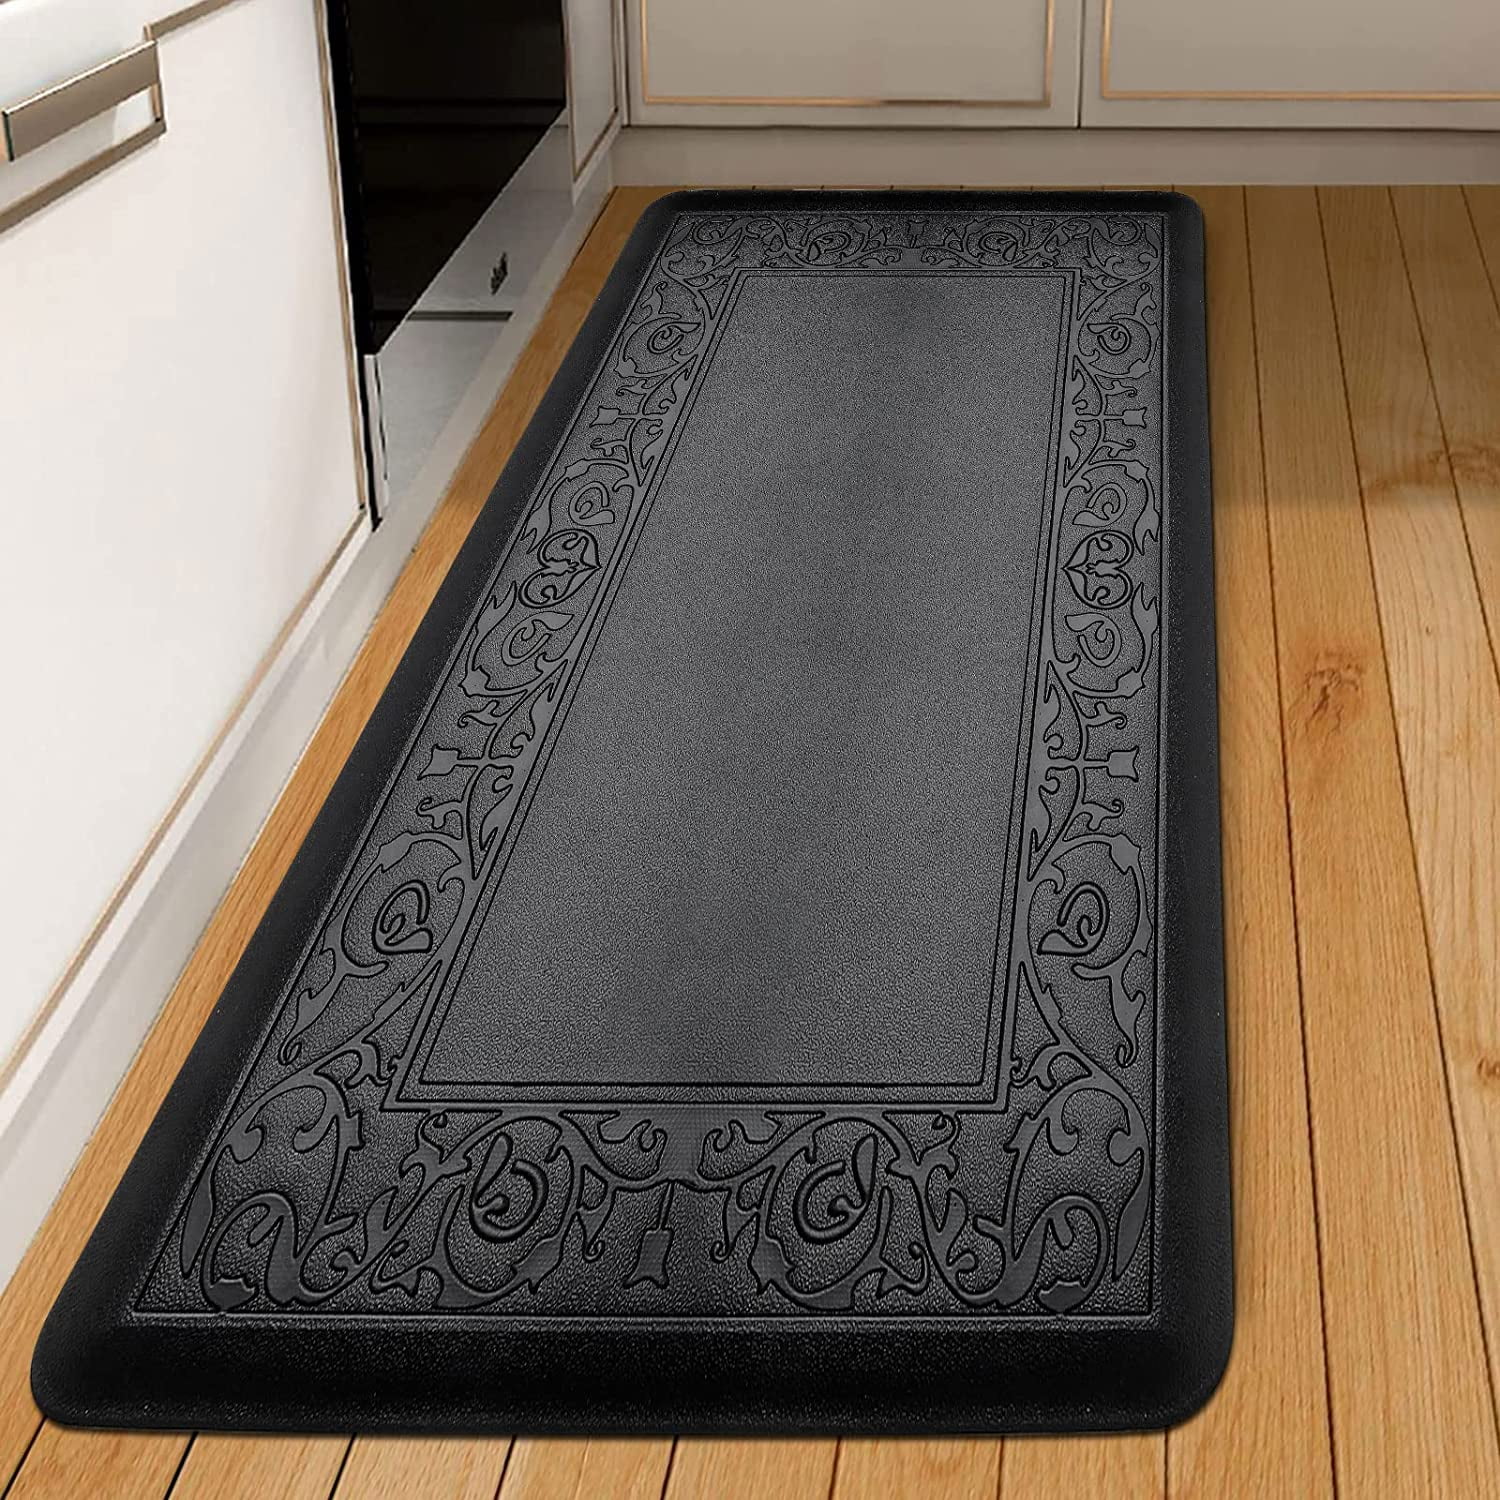 Sanmadrola Kitchen Rugs Cushioned Anti-Fatigue Runner Rug 0.75'' Thick  Waterproof Non-Slip Kitchen Mats Heavy Duty PVC Comfort Foam Rug for Kitchen,  Floor Home, Office, Sink, Laundry 20x60'' Brown 